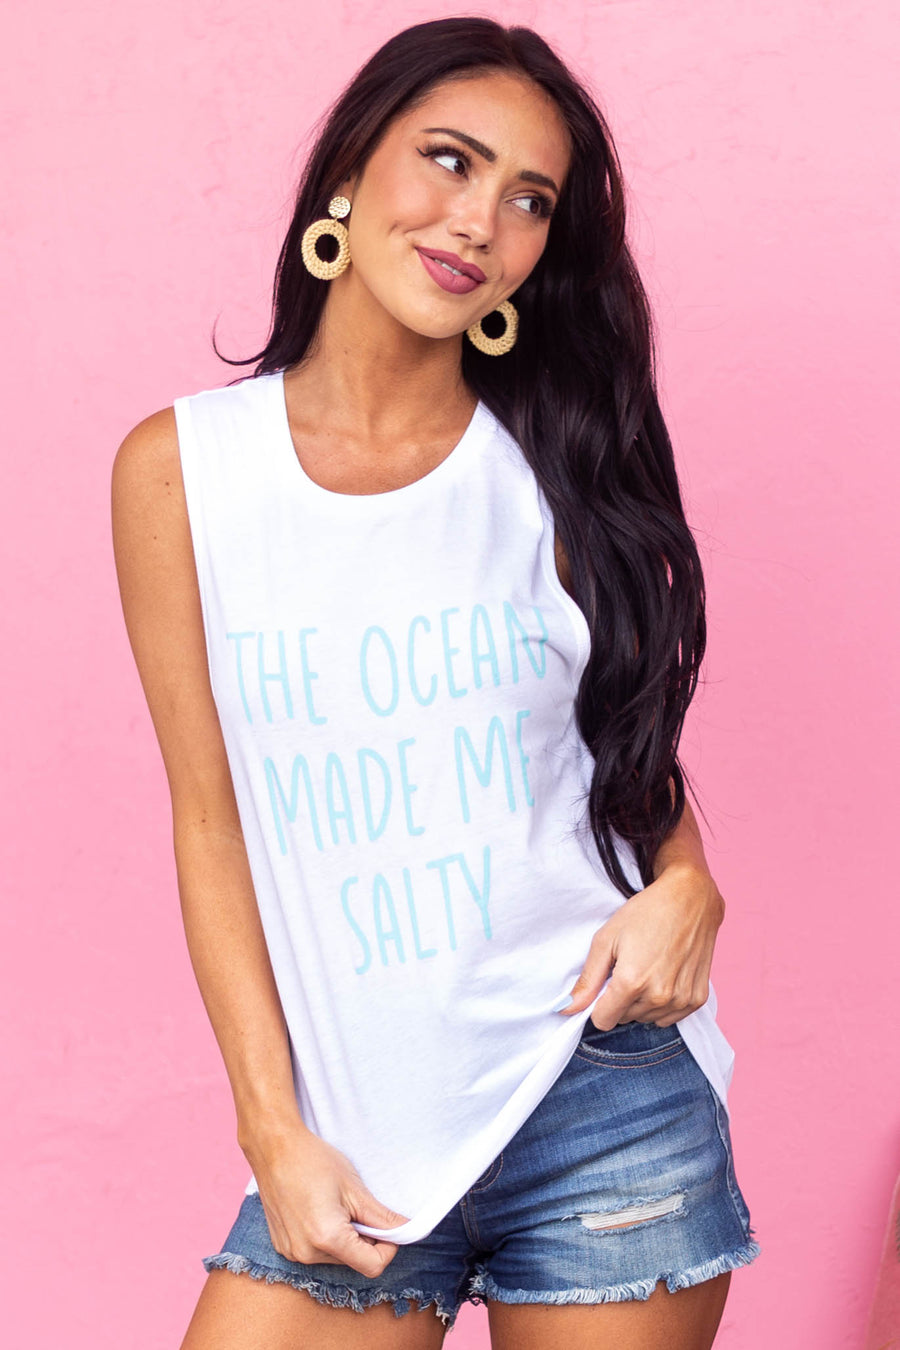 White 'The Ocean Made Me Salty' Tank Top